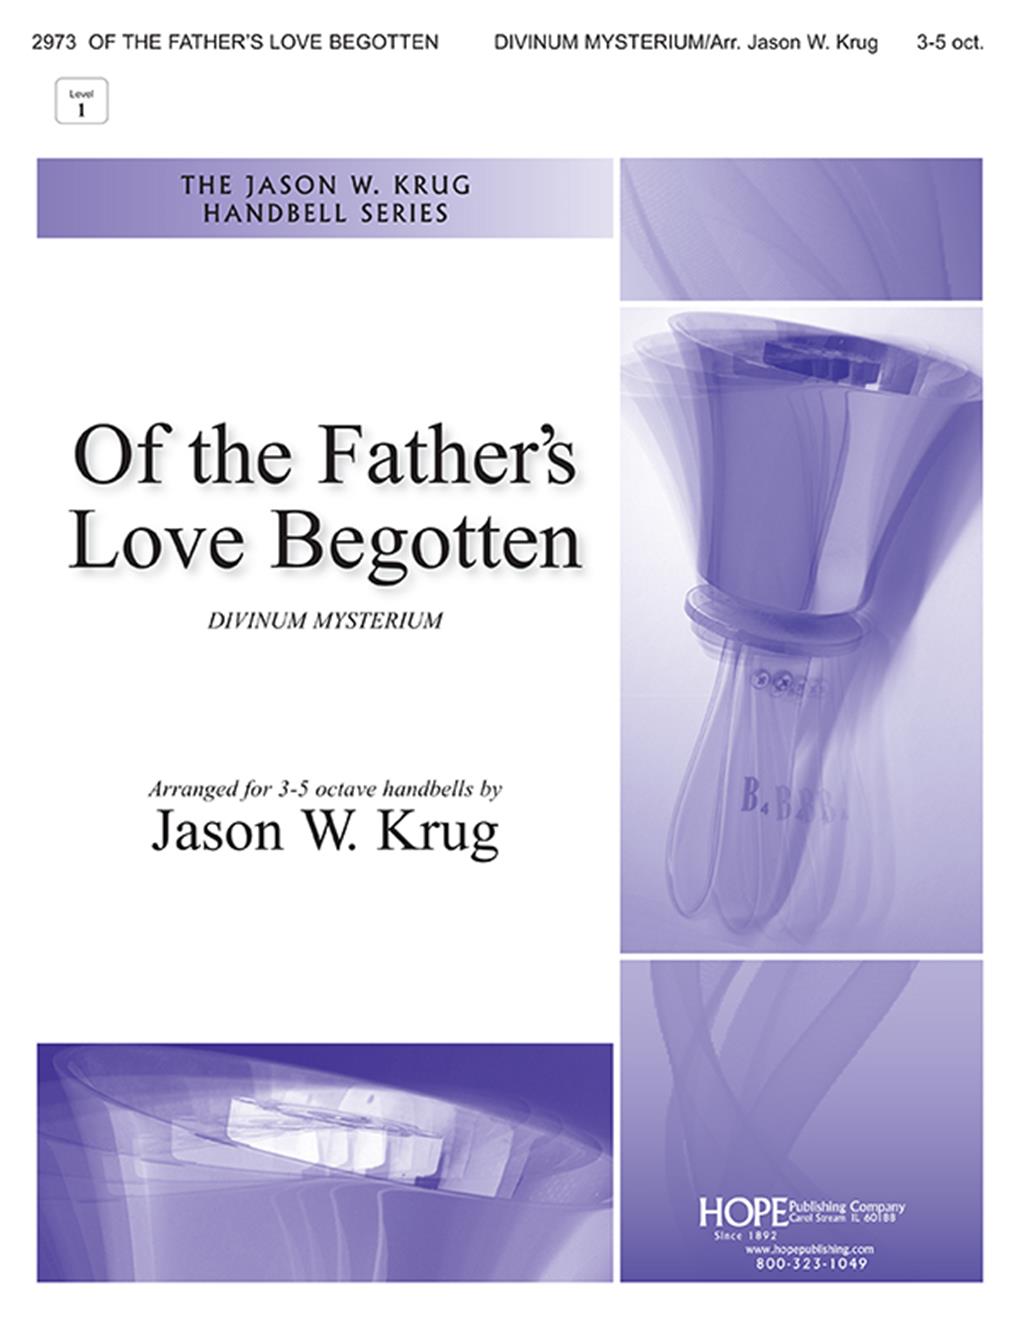 Of the Father's Love Begotten - 3-5 Oct. Cover Image